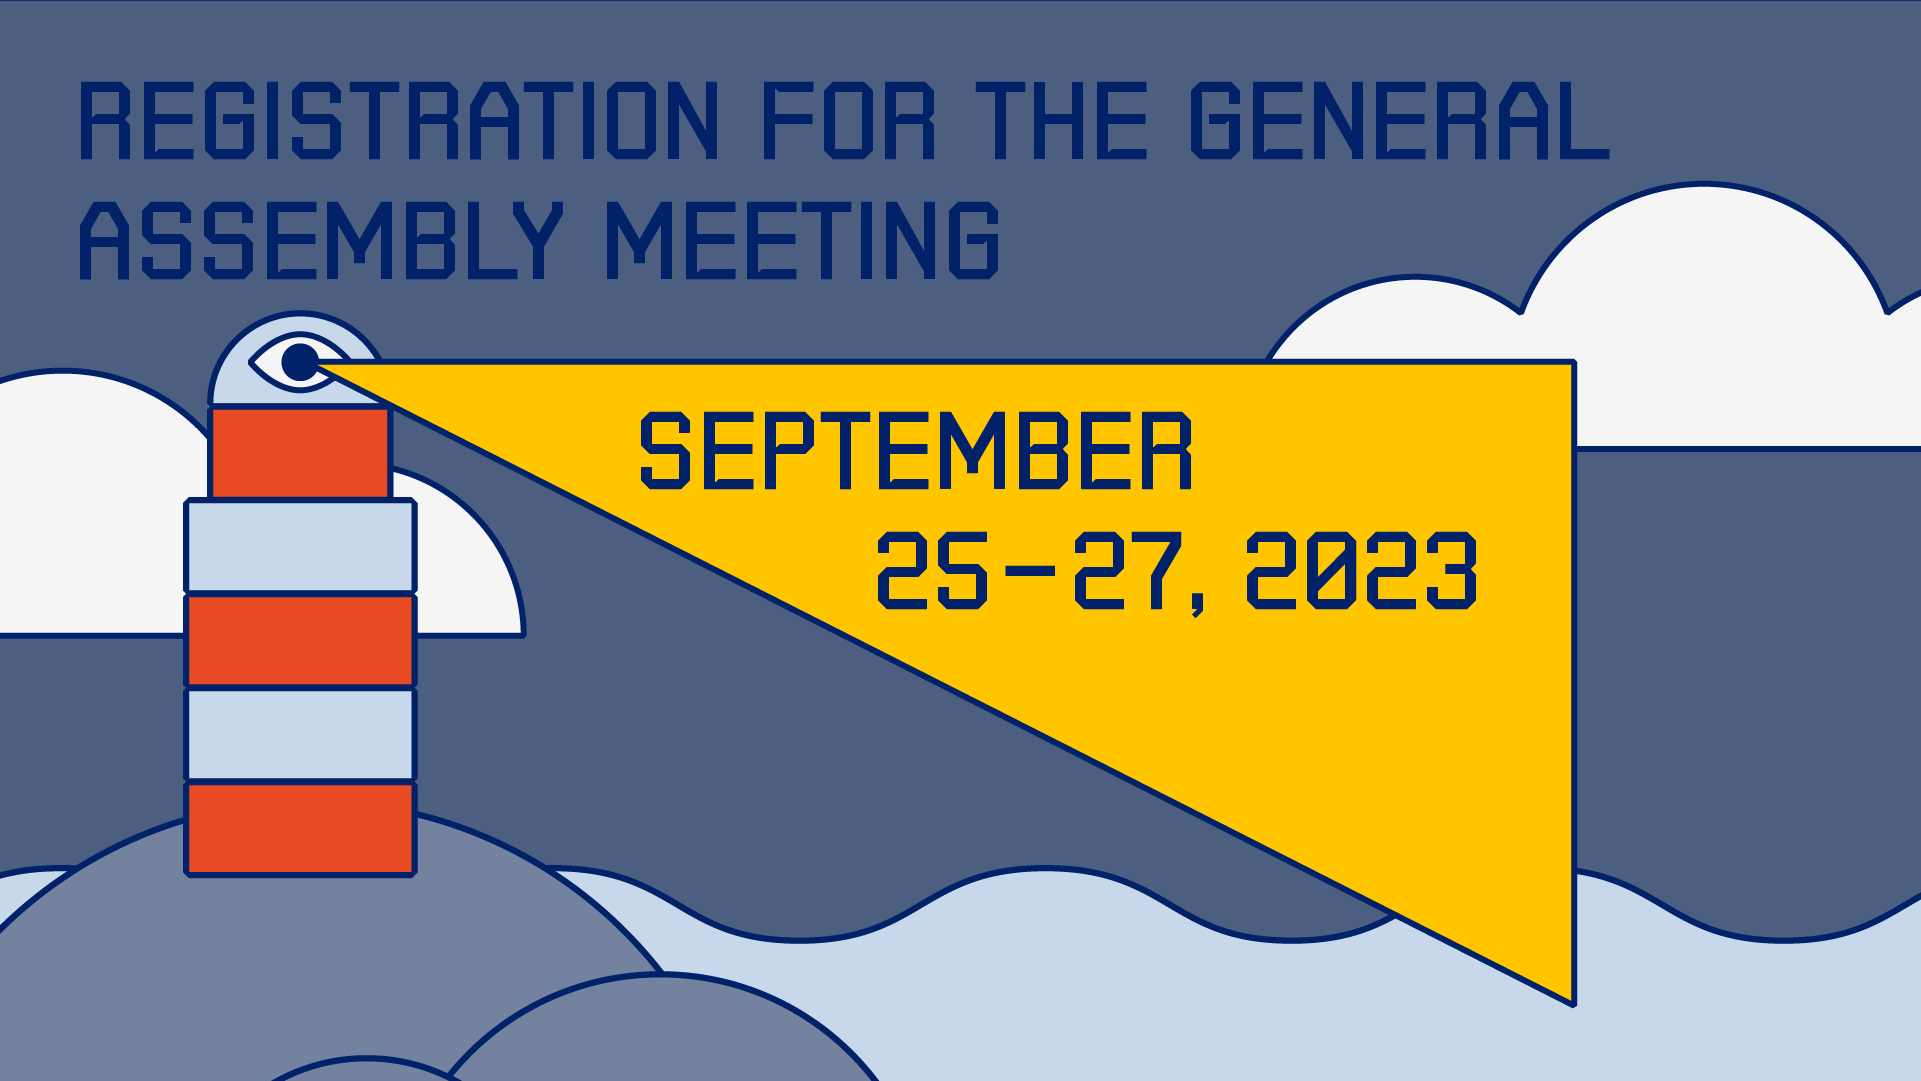 Invitation and Info about the ELSA General Assemby Meeting